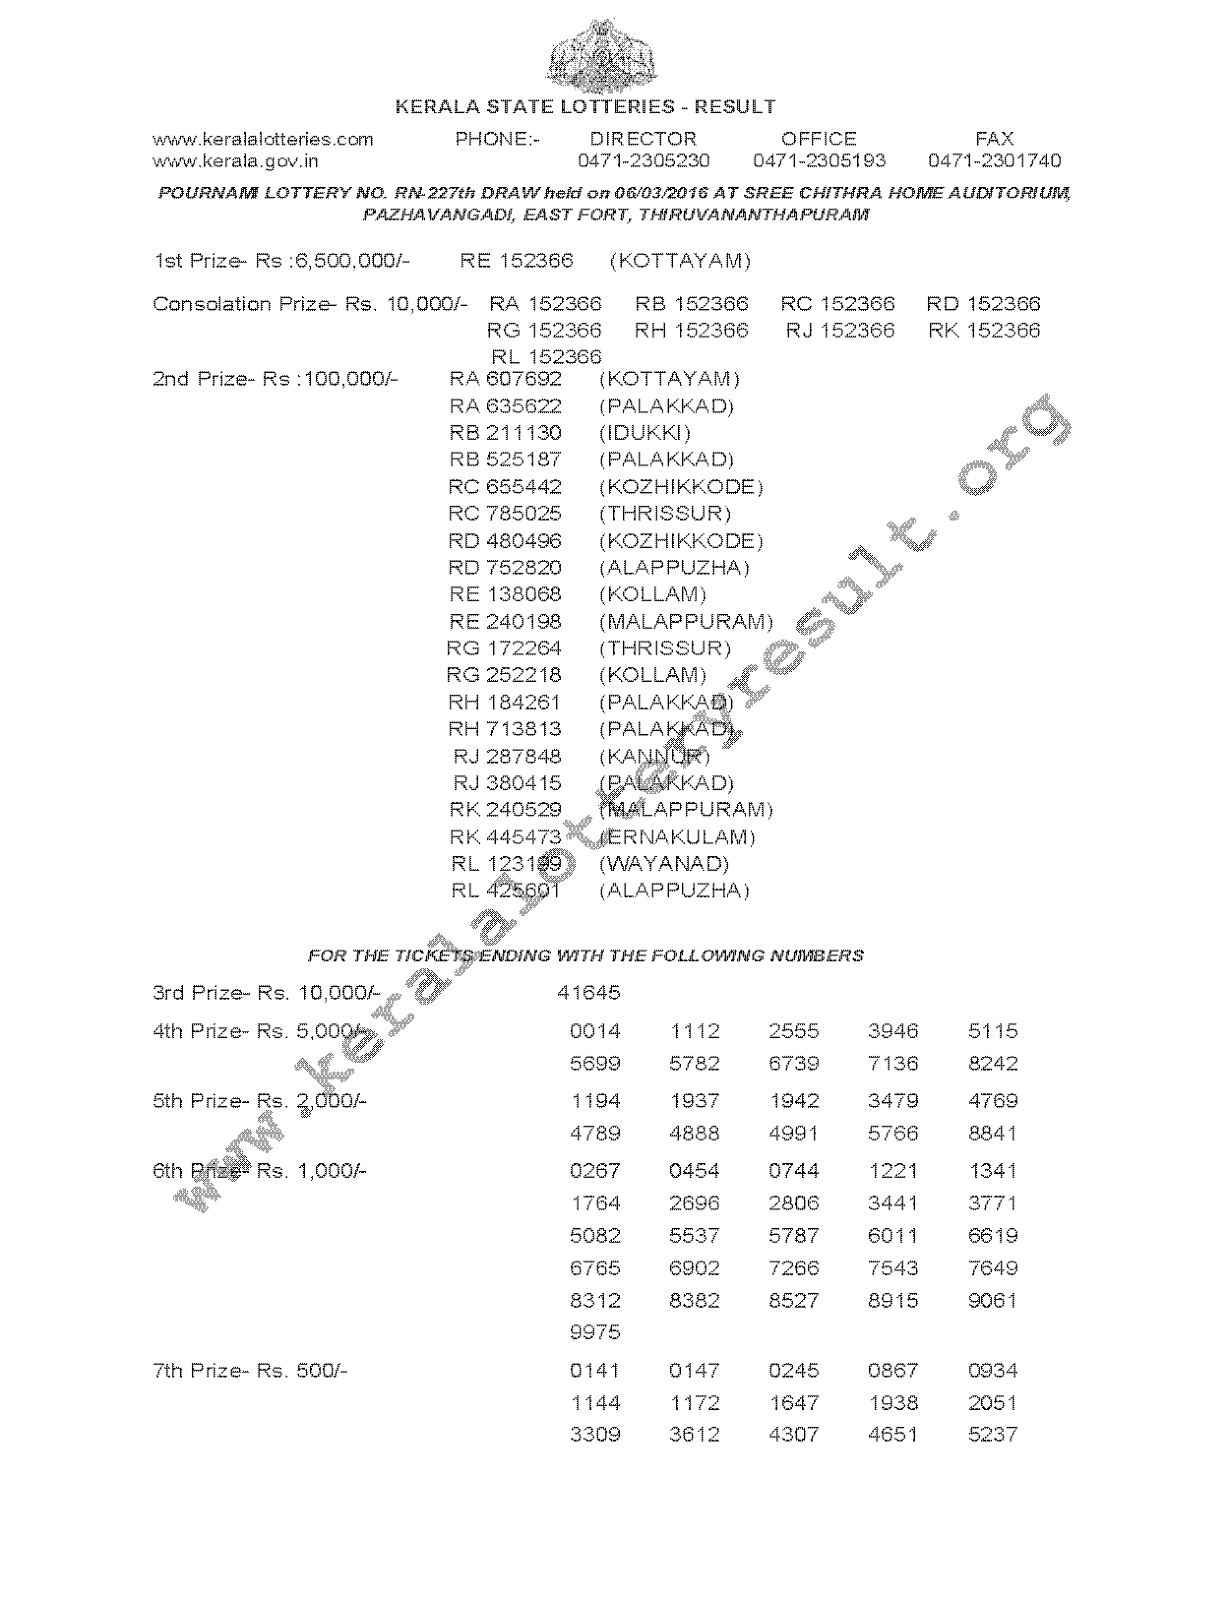 POURNAMI Lottery RN 227 Result 06-03-2016